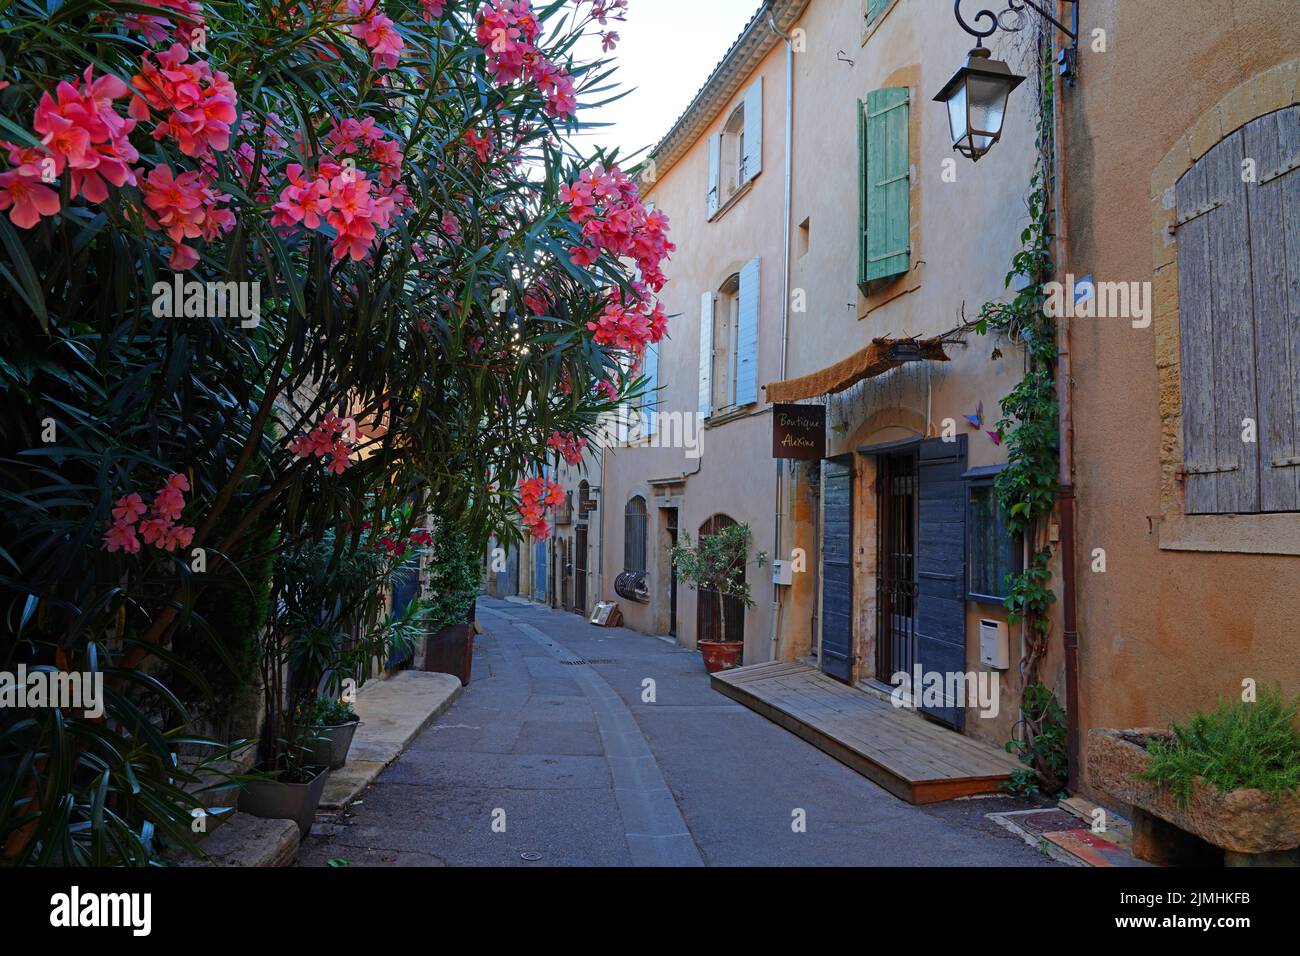 LOURMARIN, FRANCE -5 JUL 2021- View of traditional buildings in Lourmarin, a town in the Luberon area of Vaucluse, Provence, France, named as one of t Stock Photo